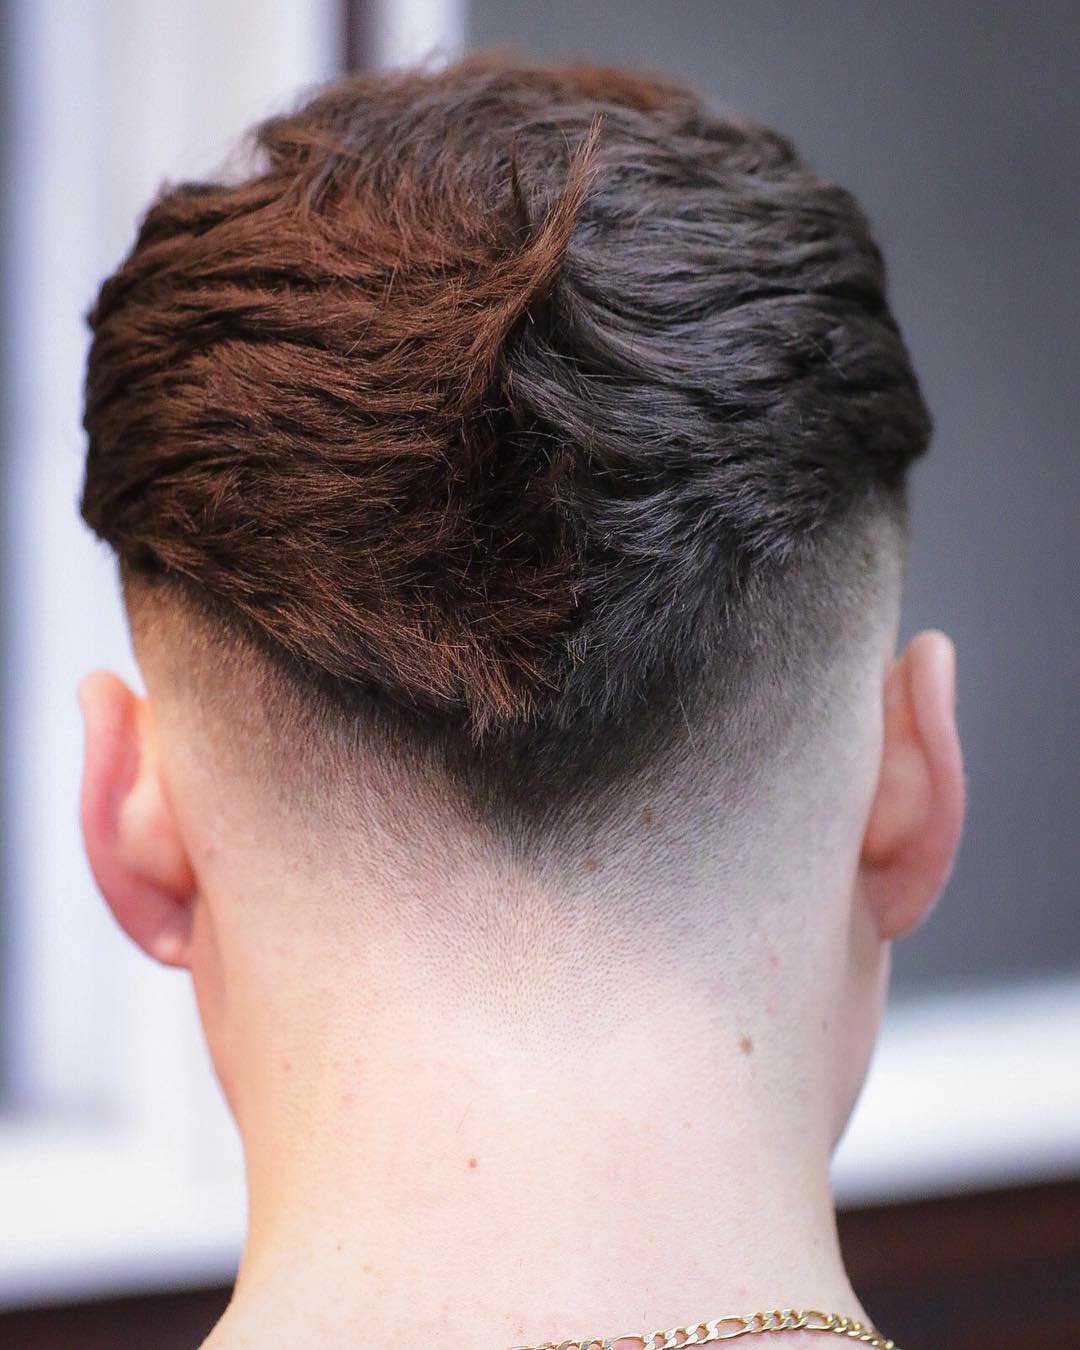 CShape Haircut For 90s Inspired Layers  POPSUGAR Beauty UK